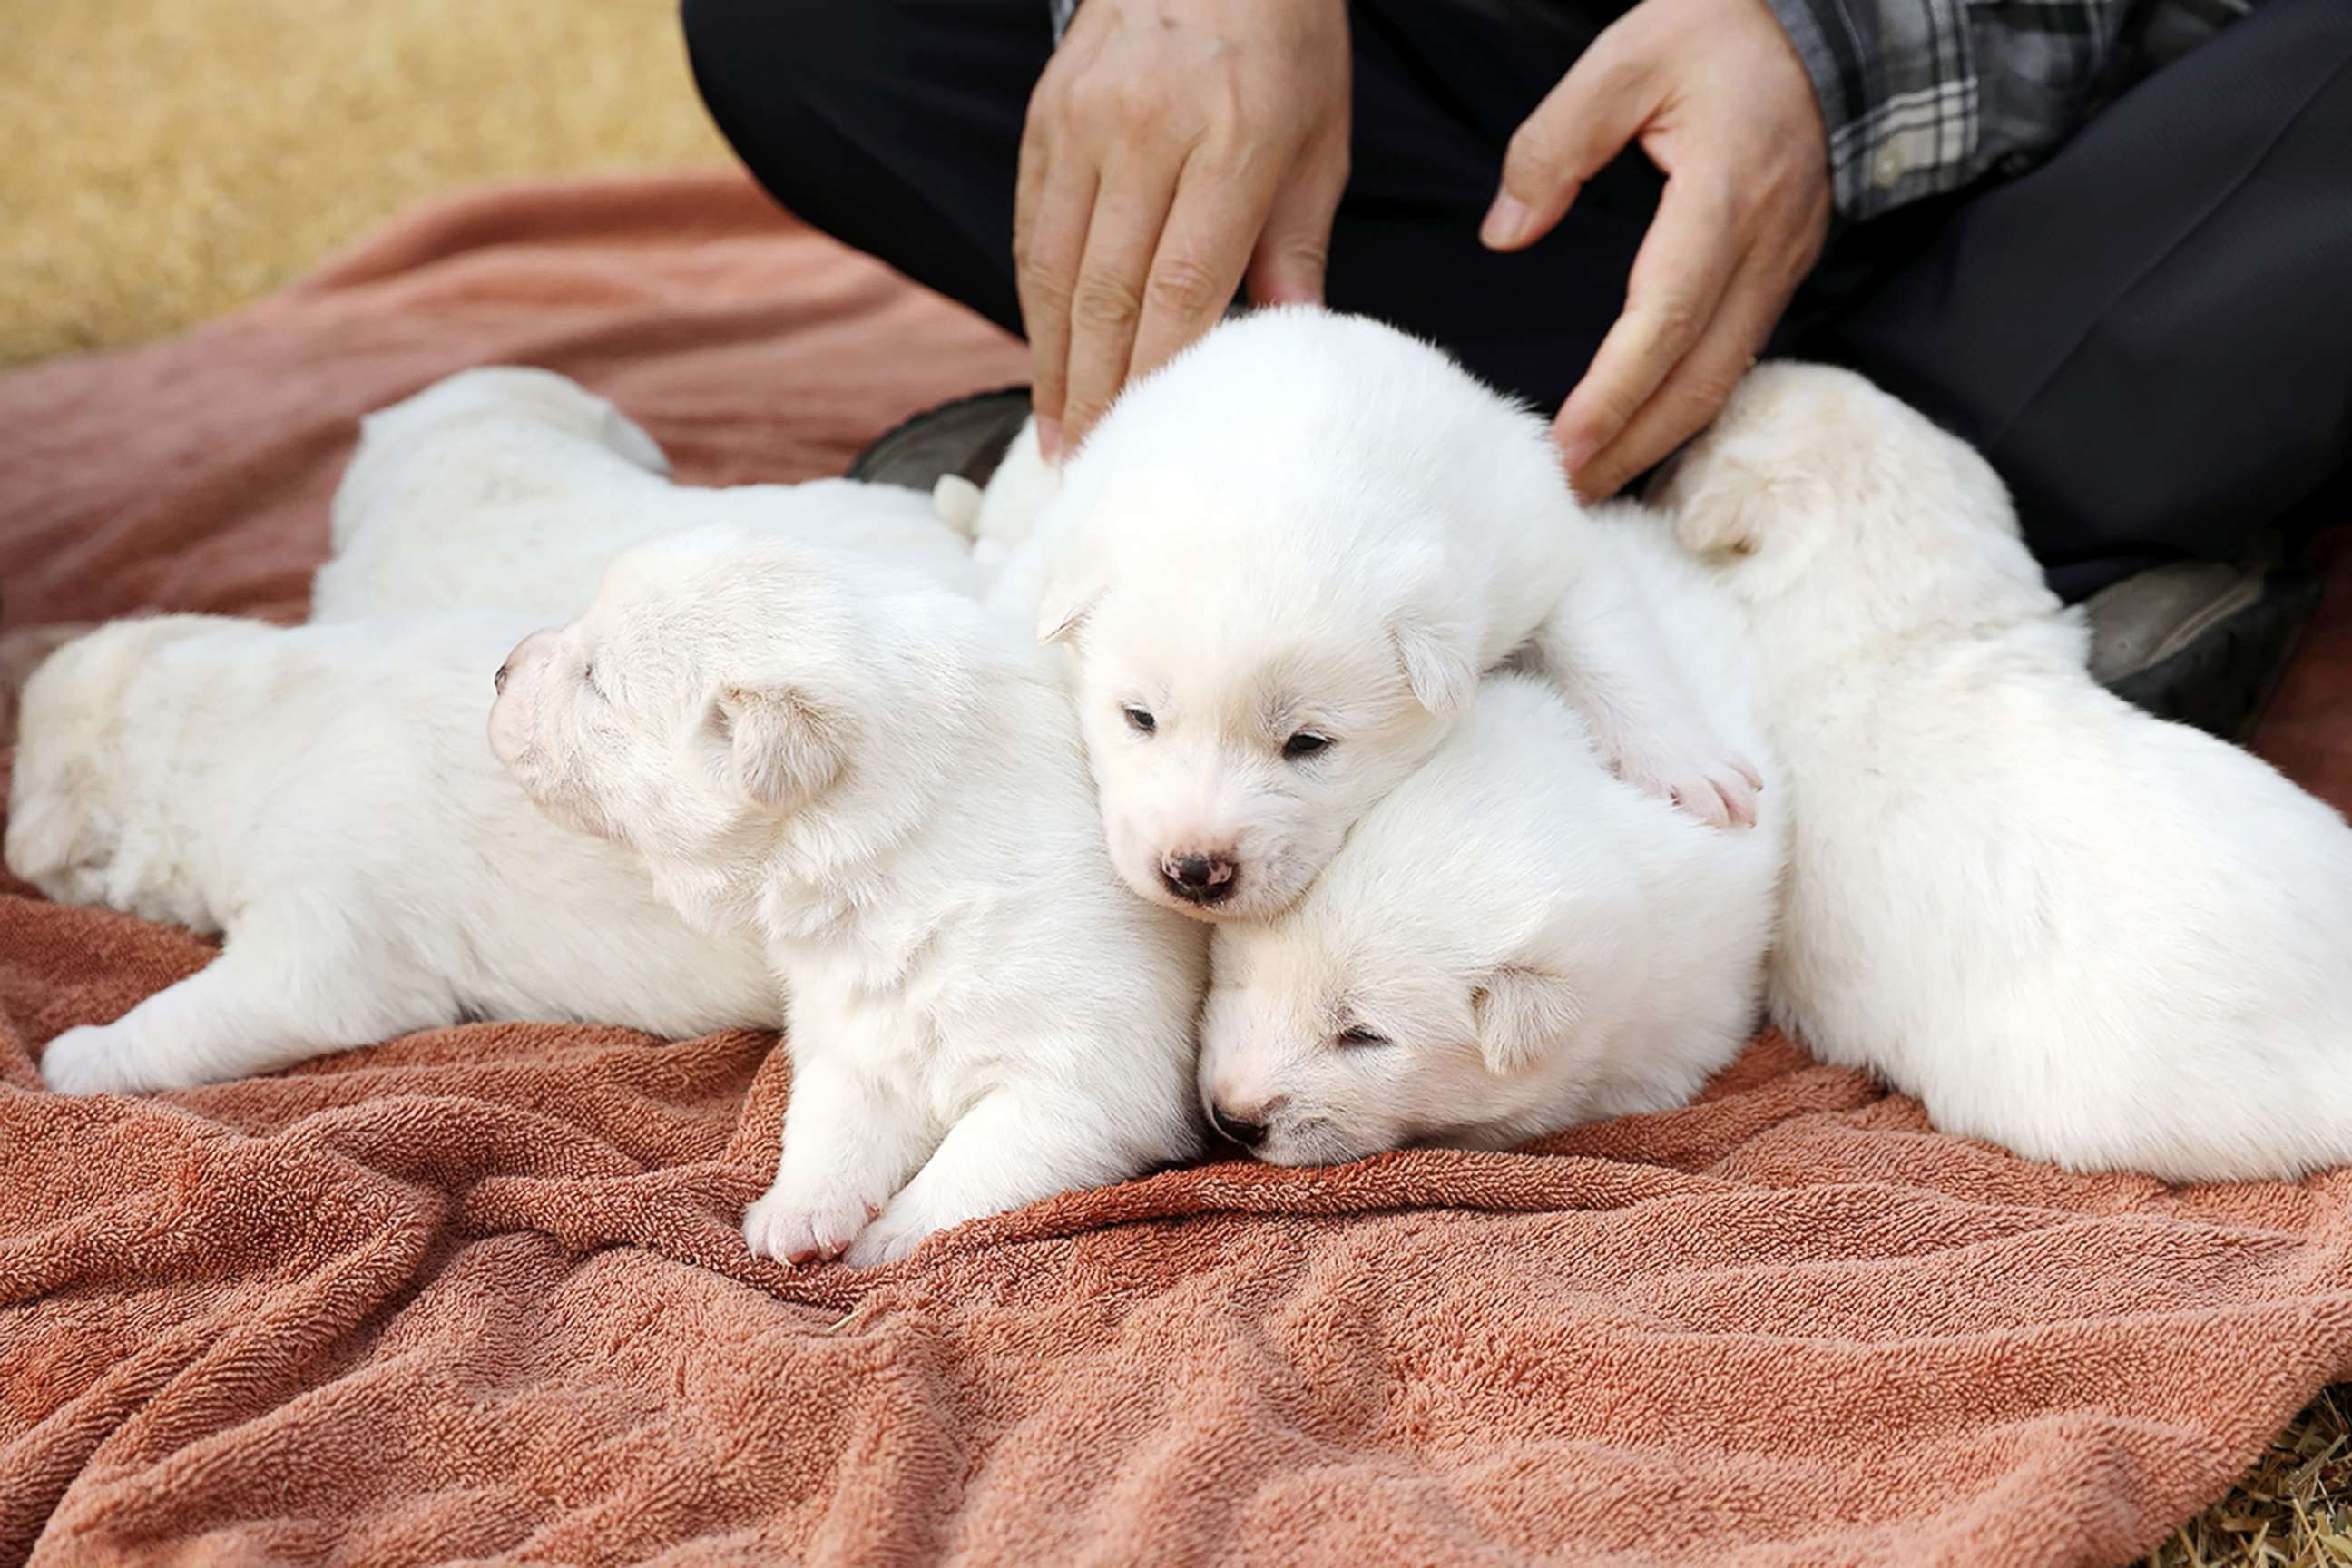 PHOTO: A hunting dog given to South Korea by North Korea gave birth to six puppies.